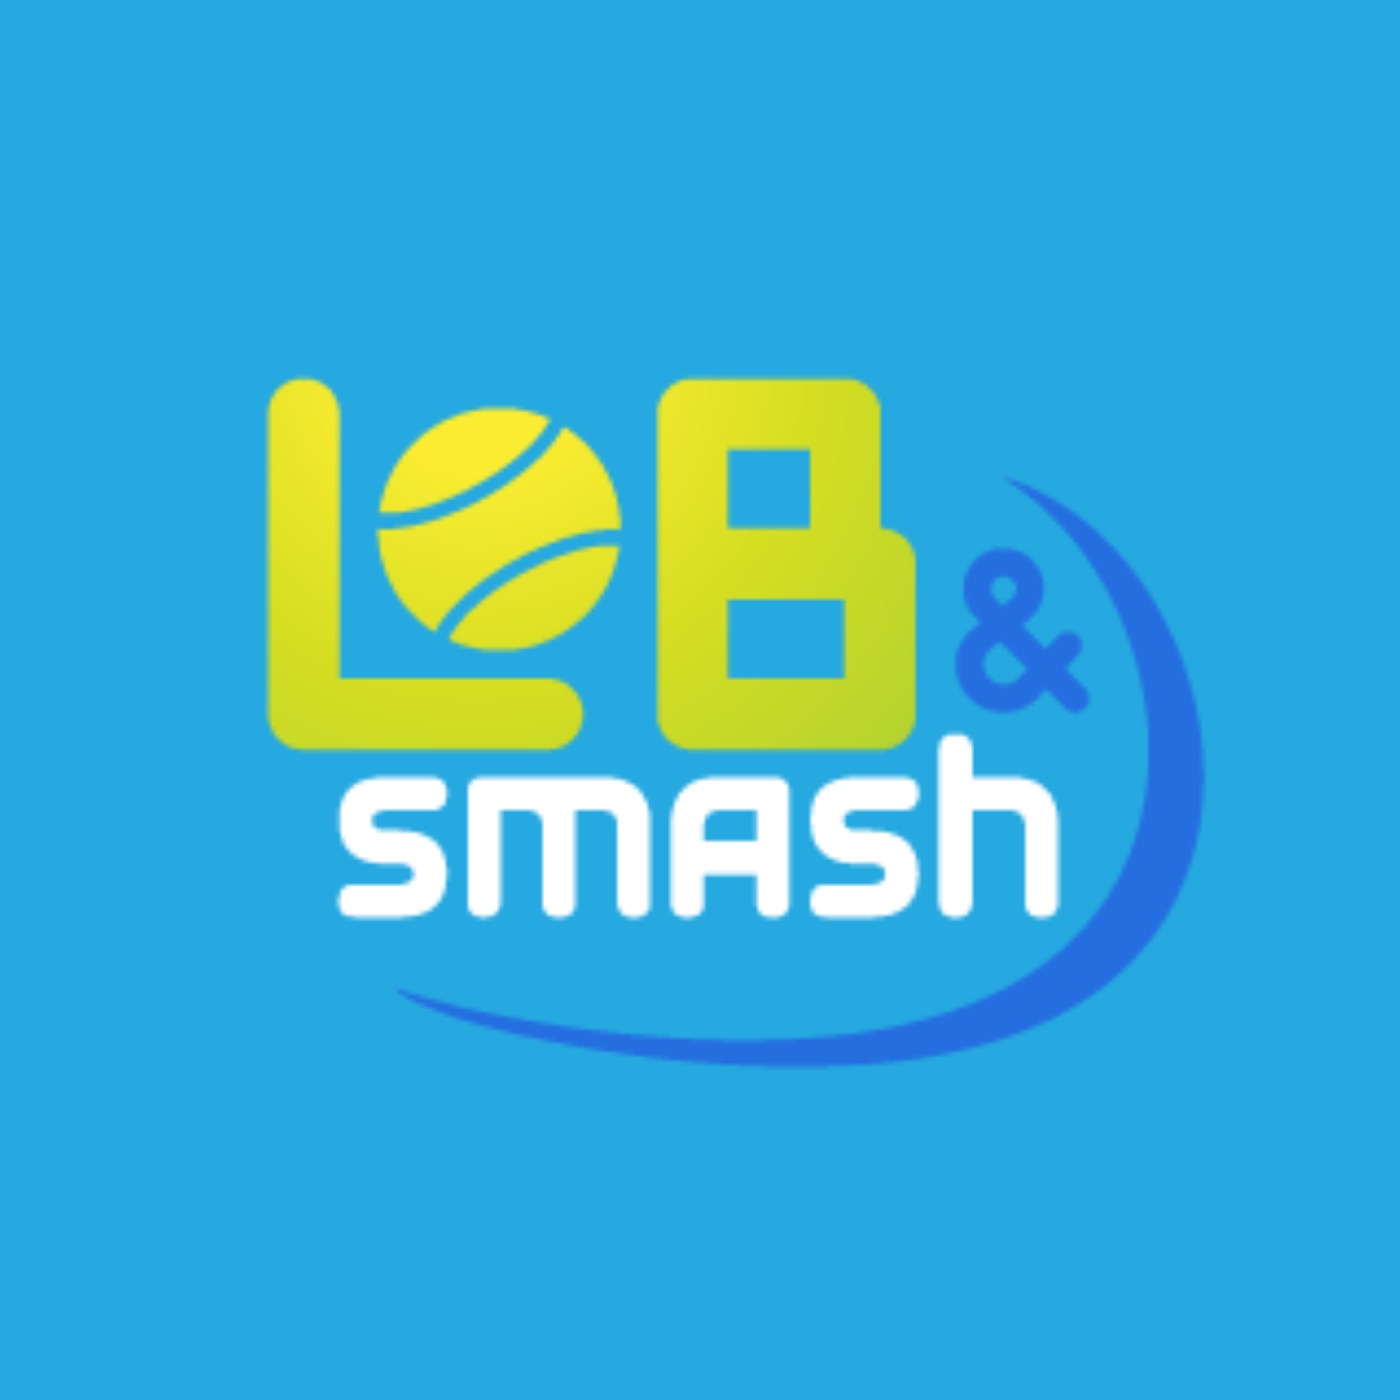 Lob and Smash podcast: Coming soon to a speaker system near you